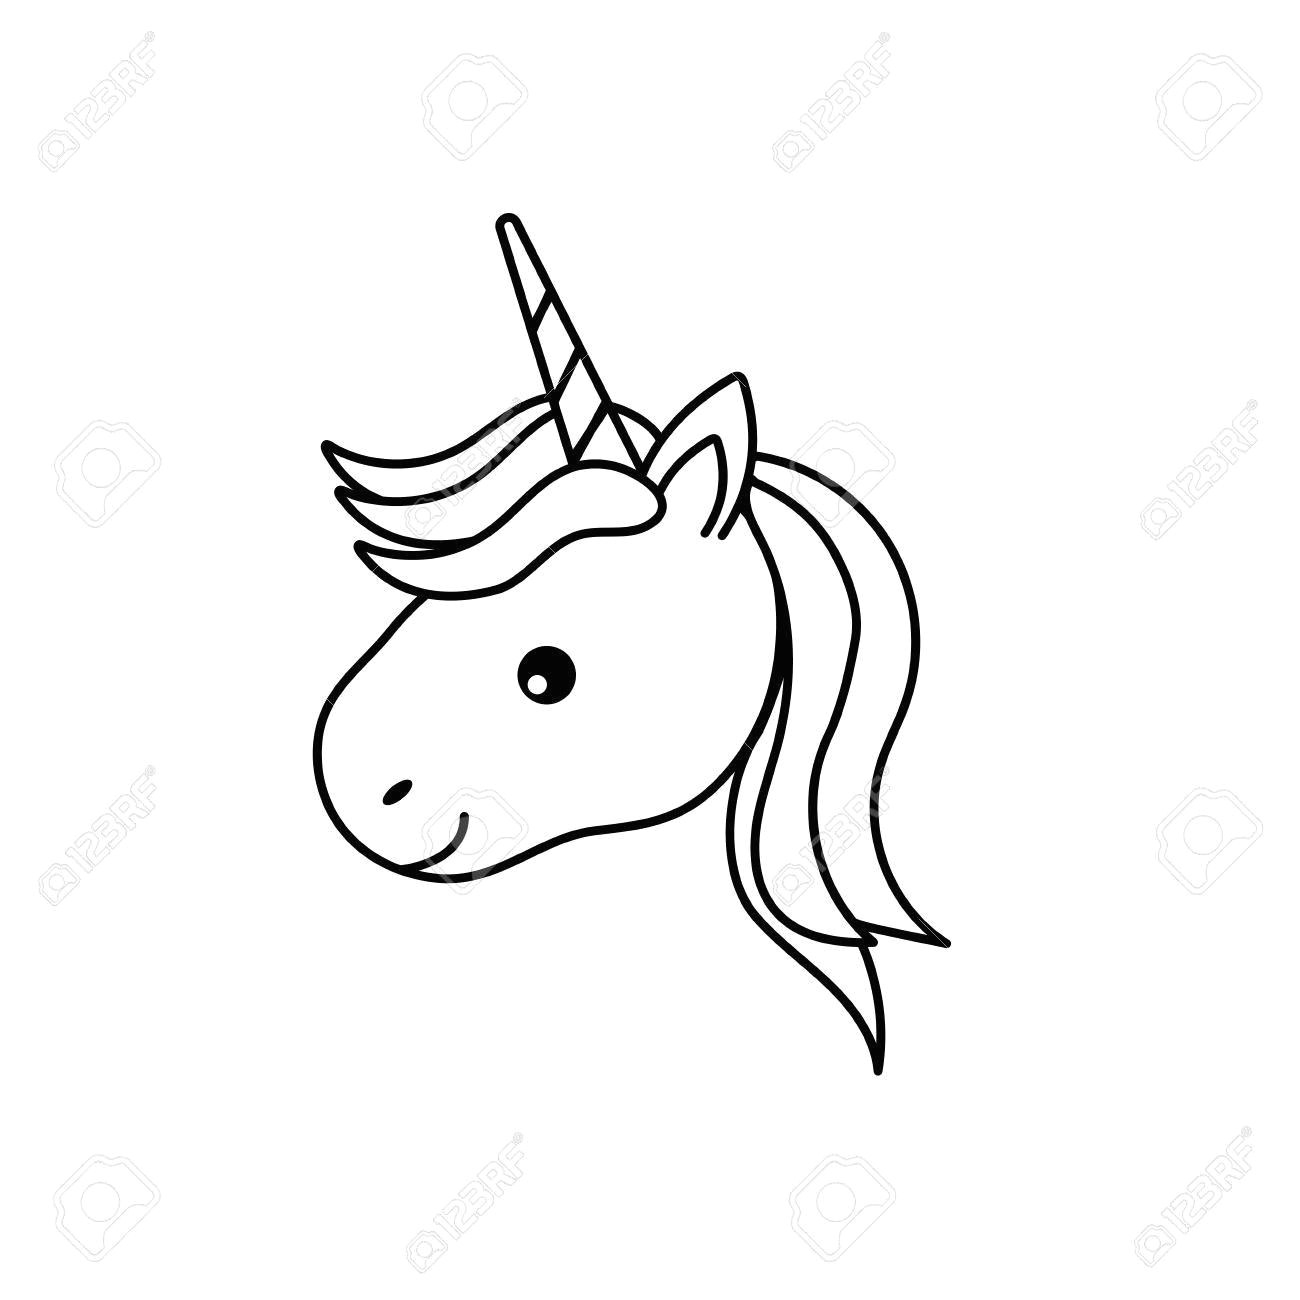 Drawing Ideas Unicorn Image Result for Line Drawing Unicorn Unicorn Unicorn Unicorn